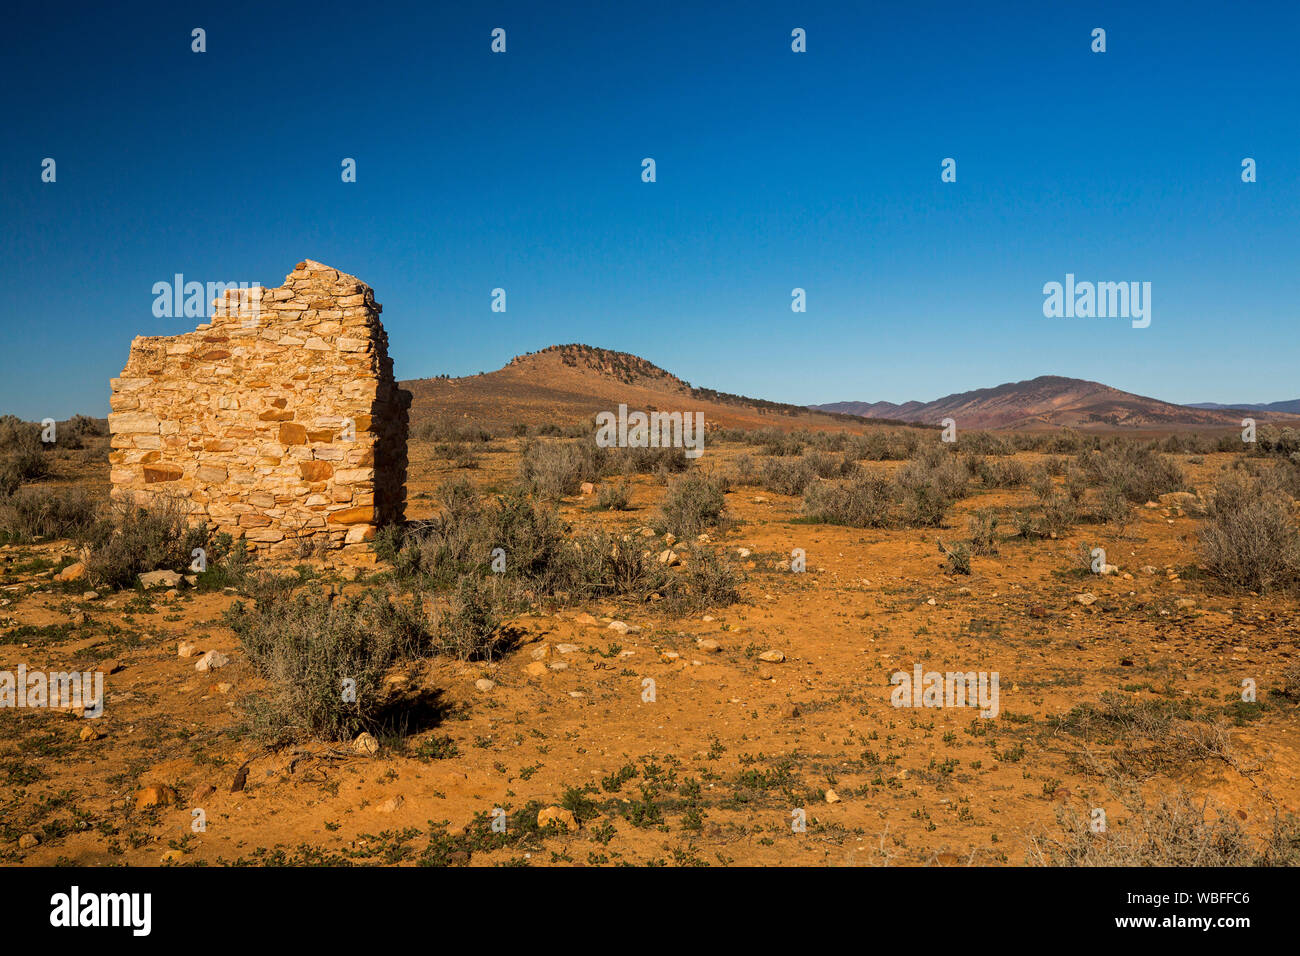 Outback landscape with ruins of Simonston on red stony soil & barren hill rising to blue sky in Flinders Ranges region north of Quorn South Australia Stock Photo